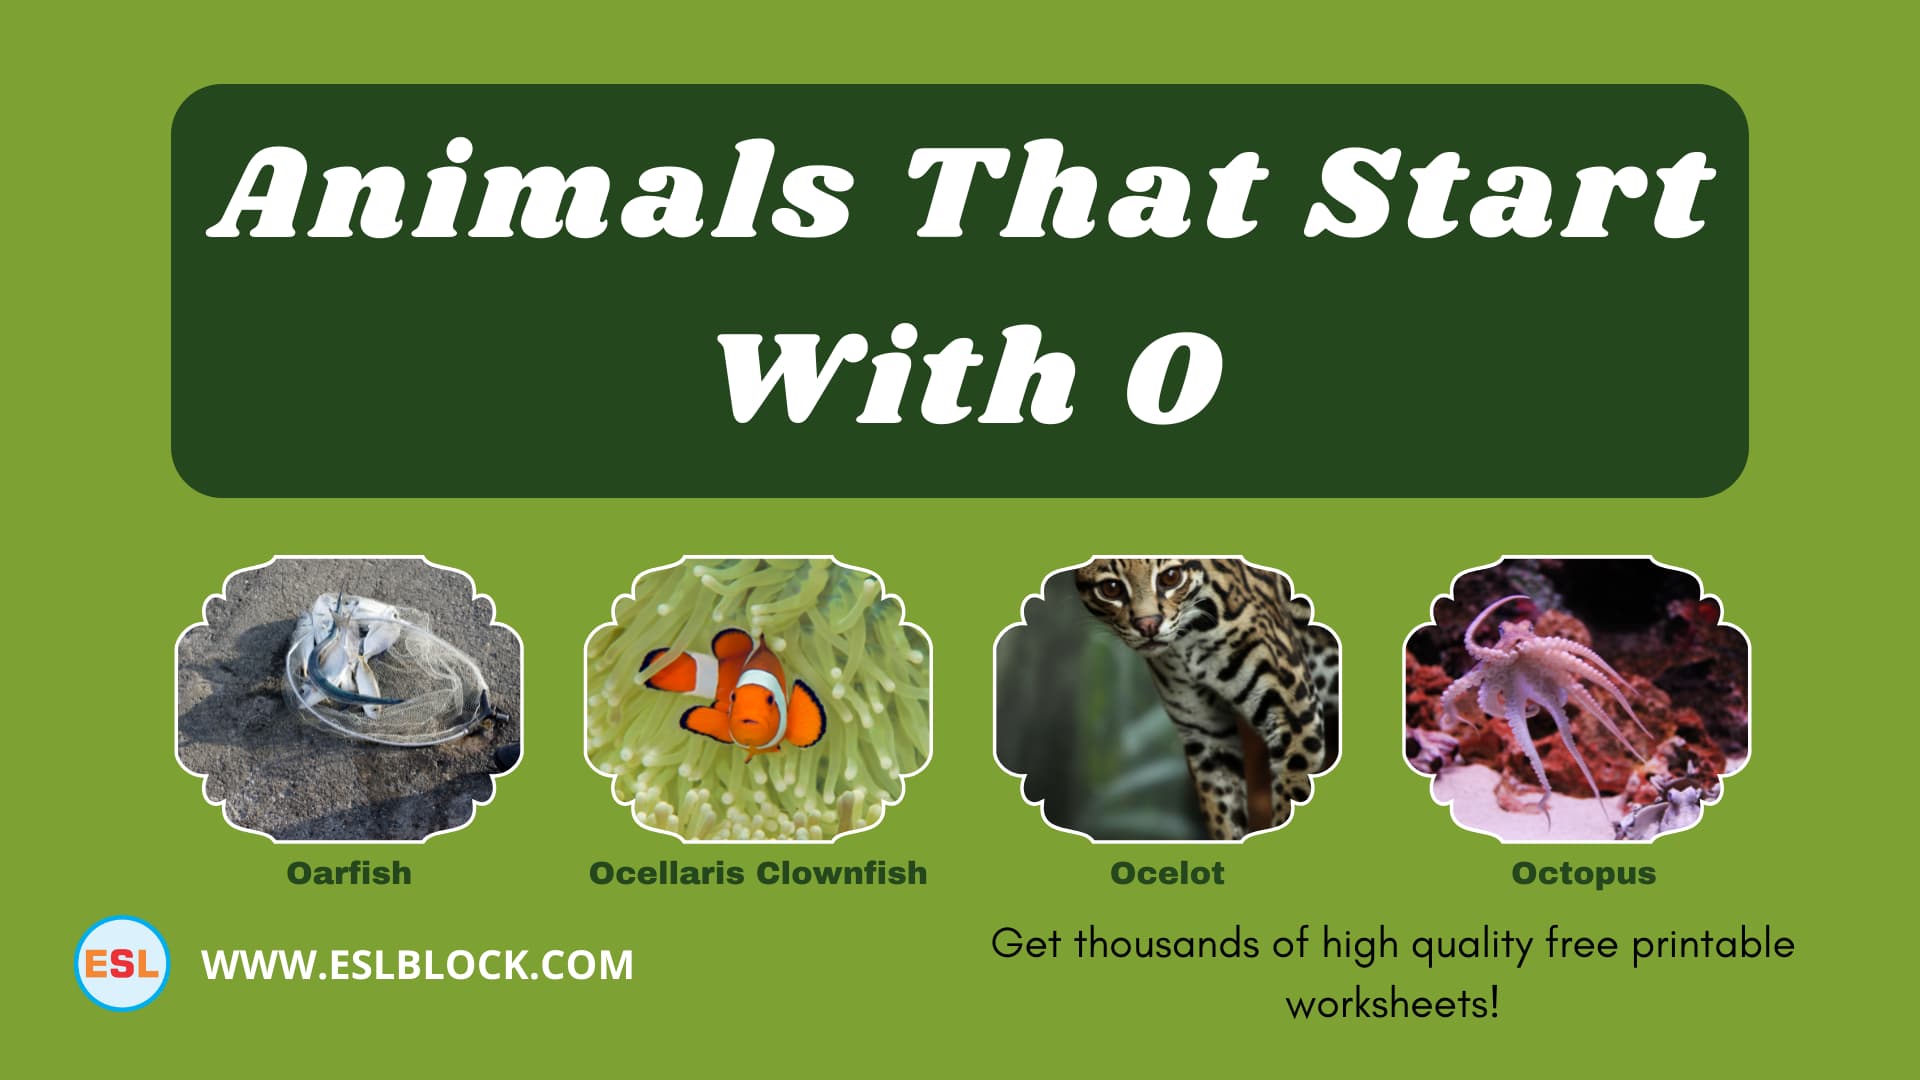 5 Letter Animals Starting With O, Animals List, Animals Names, Animals That Begins With O, Animals That Start With O, English, English Nouns, English Vocabulary, English Words, List of Animals That Start With O, Nouns, O Animals, O Animals in English, O Animals Names, Vocabulary